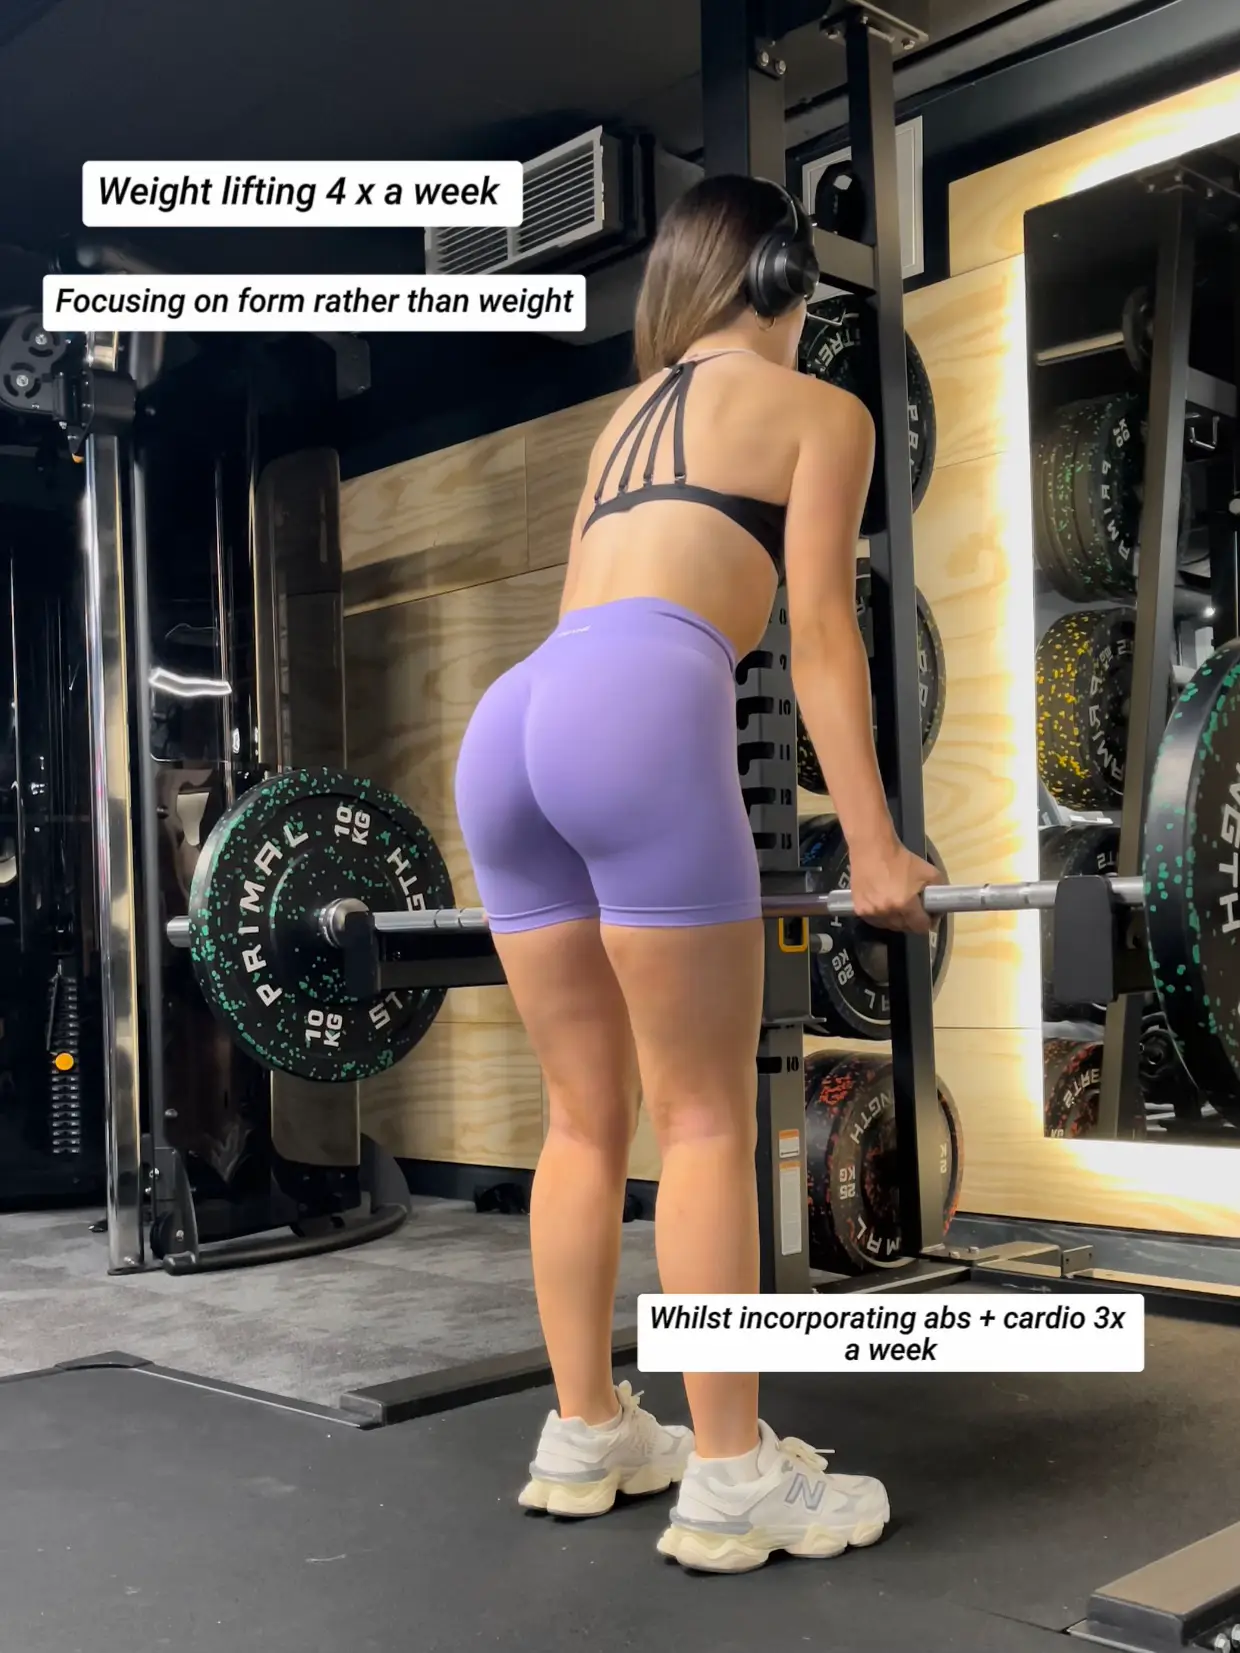 Lex Loses Nearly 1kg a Week Lifting Weights to Achieve Her Perfect Body